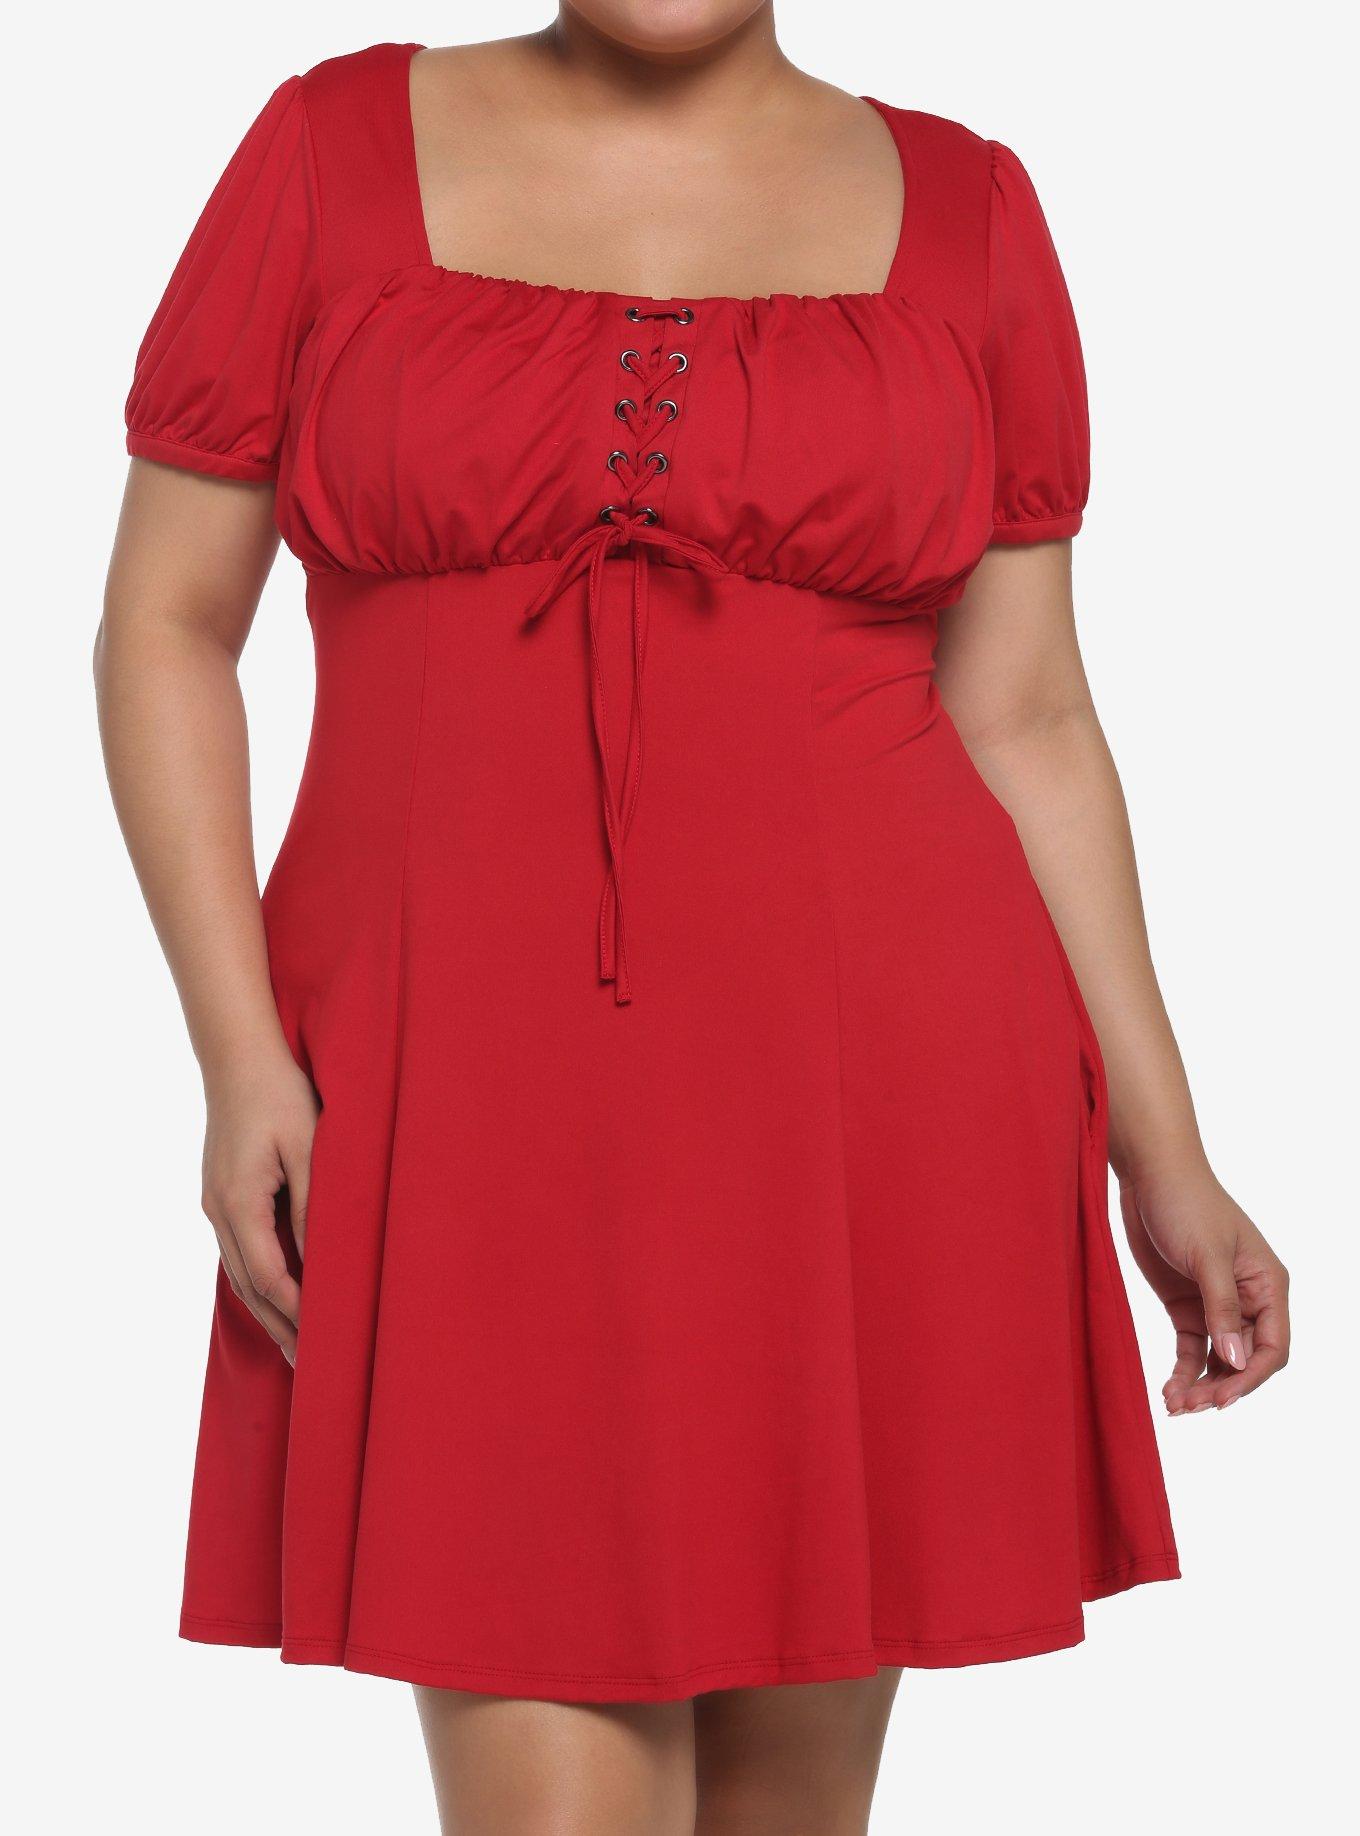 Red Empire Waist Dress Plus Size, RED, hi-res